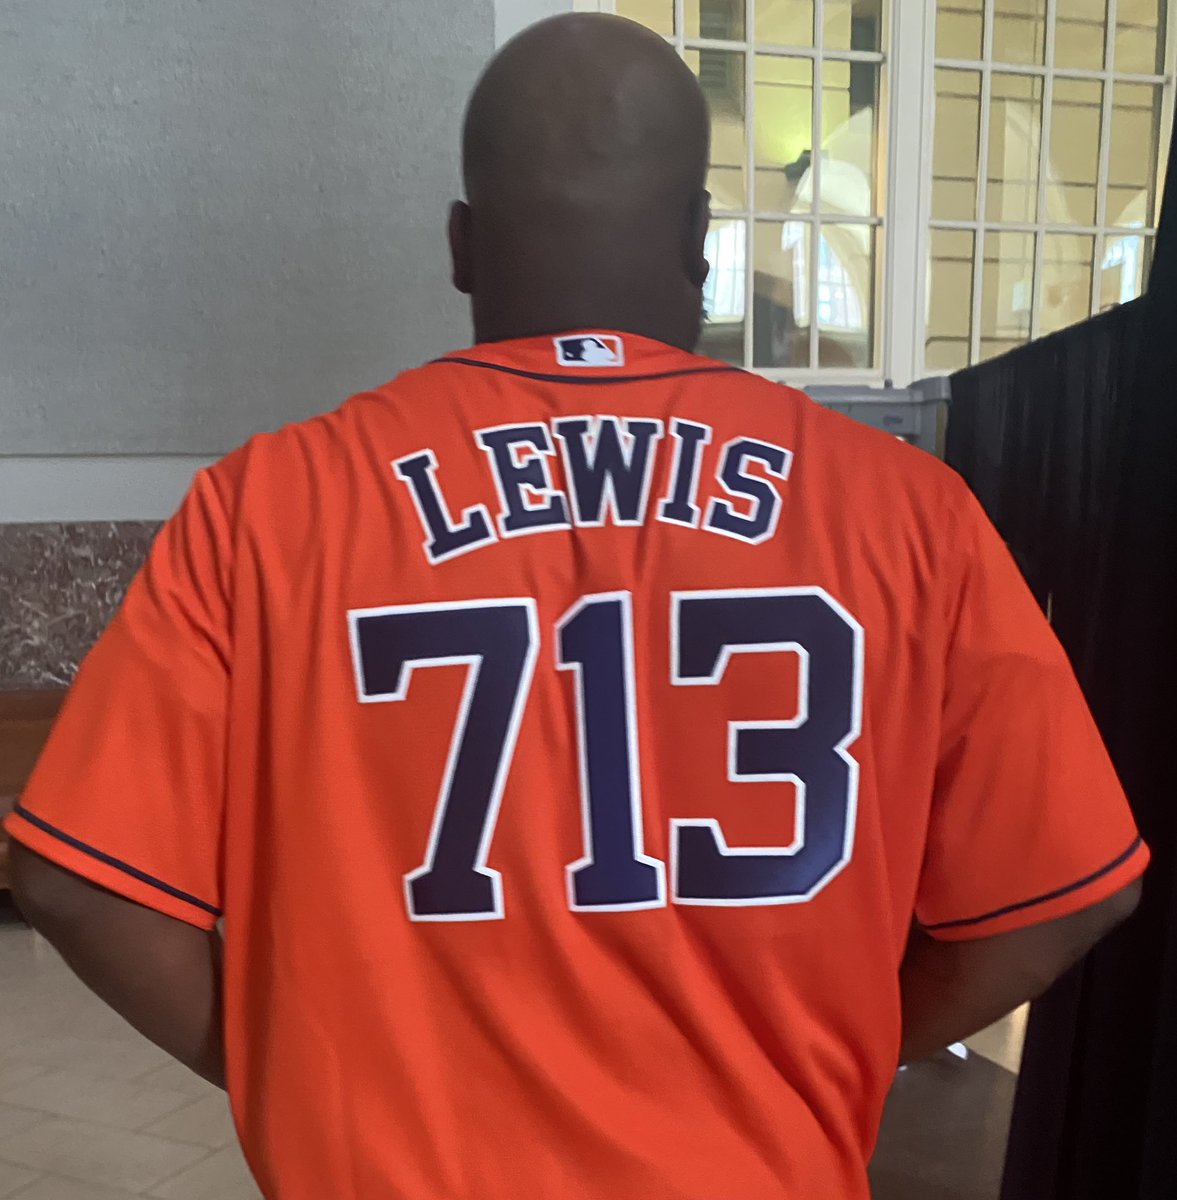 Houstonian Derrick Lewis (@Thebeast_ufc), who will fight for the @ufc interim heavyweight title Aug 7 at Toyota Center, will throw out the first pitch tonight before the #Astros play the A’s.